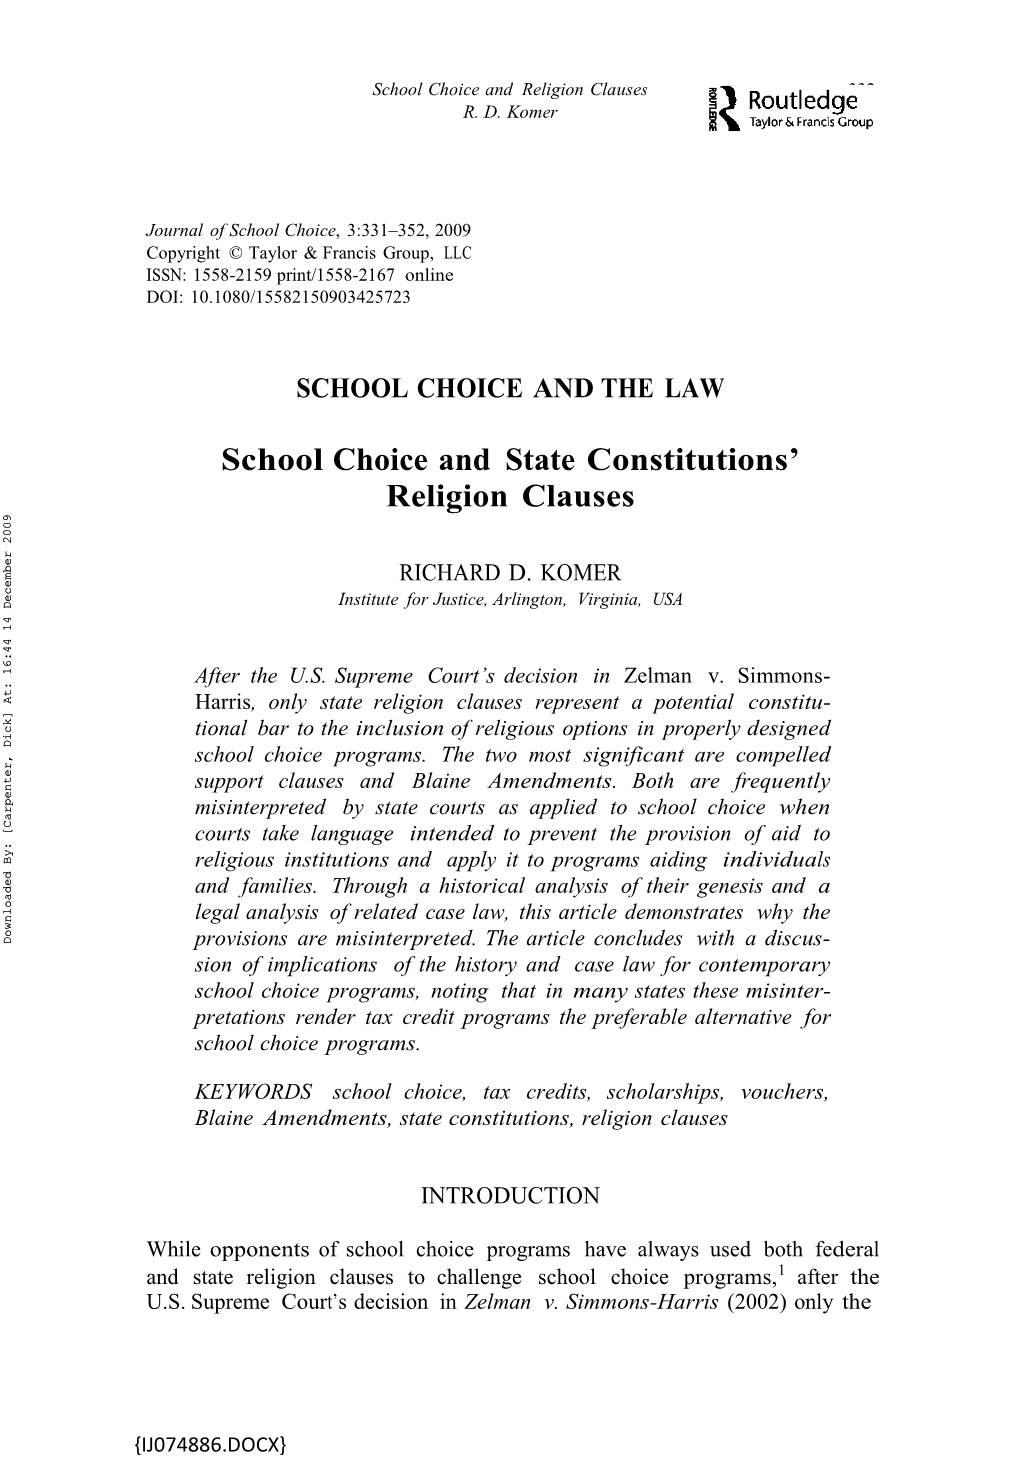 School Choice and State Constitutions' Religion Clauses